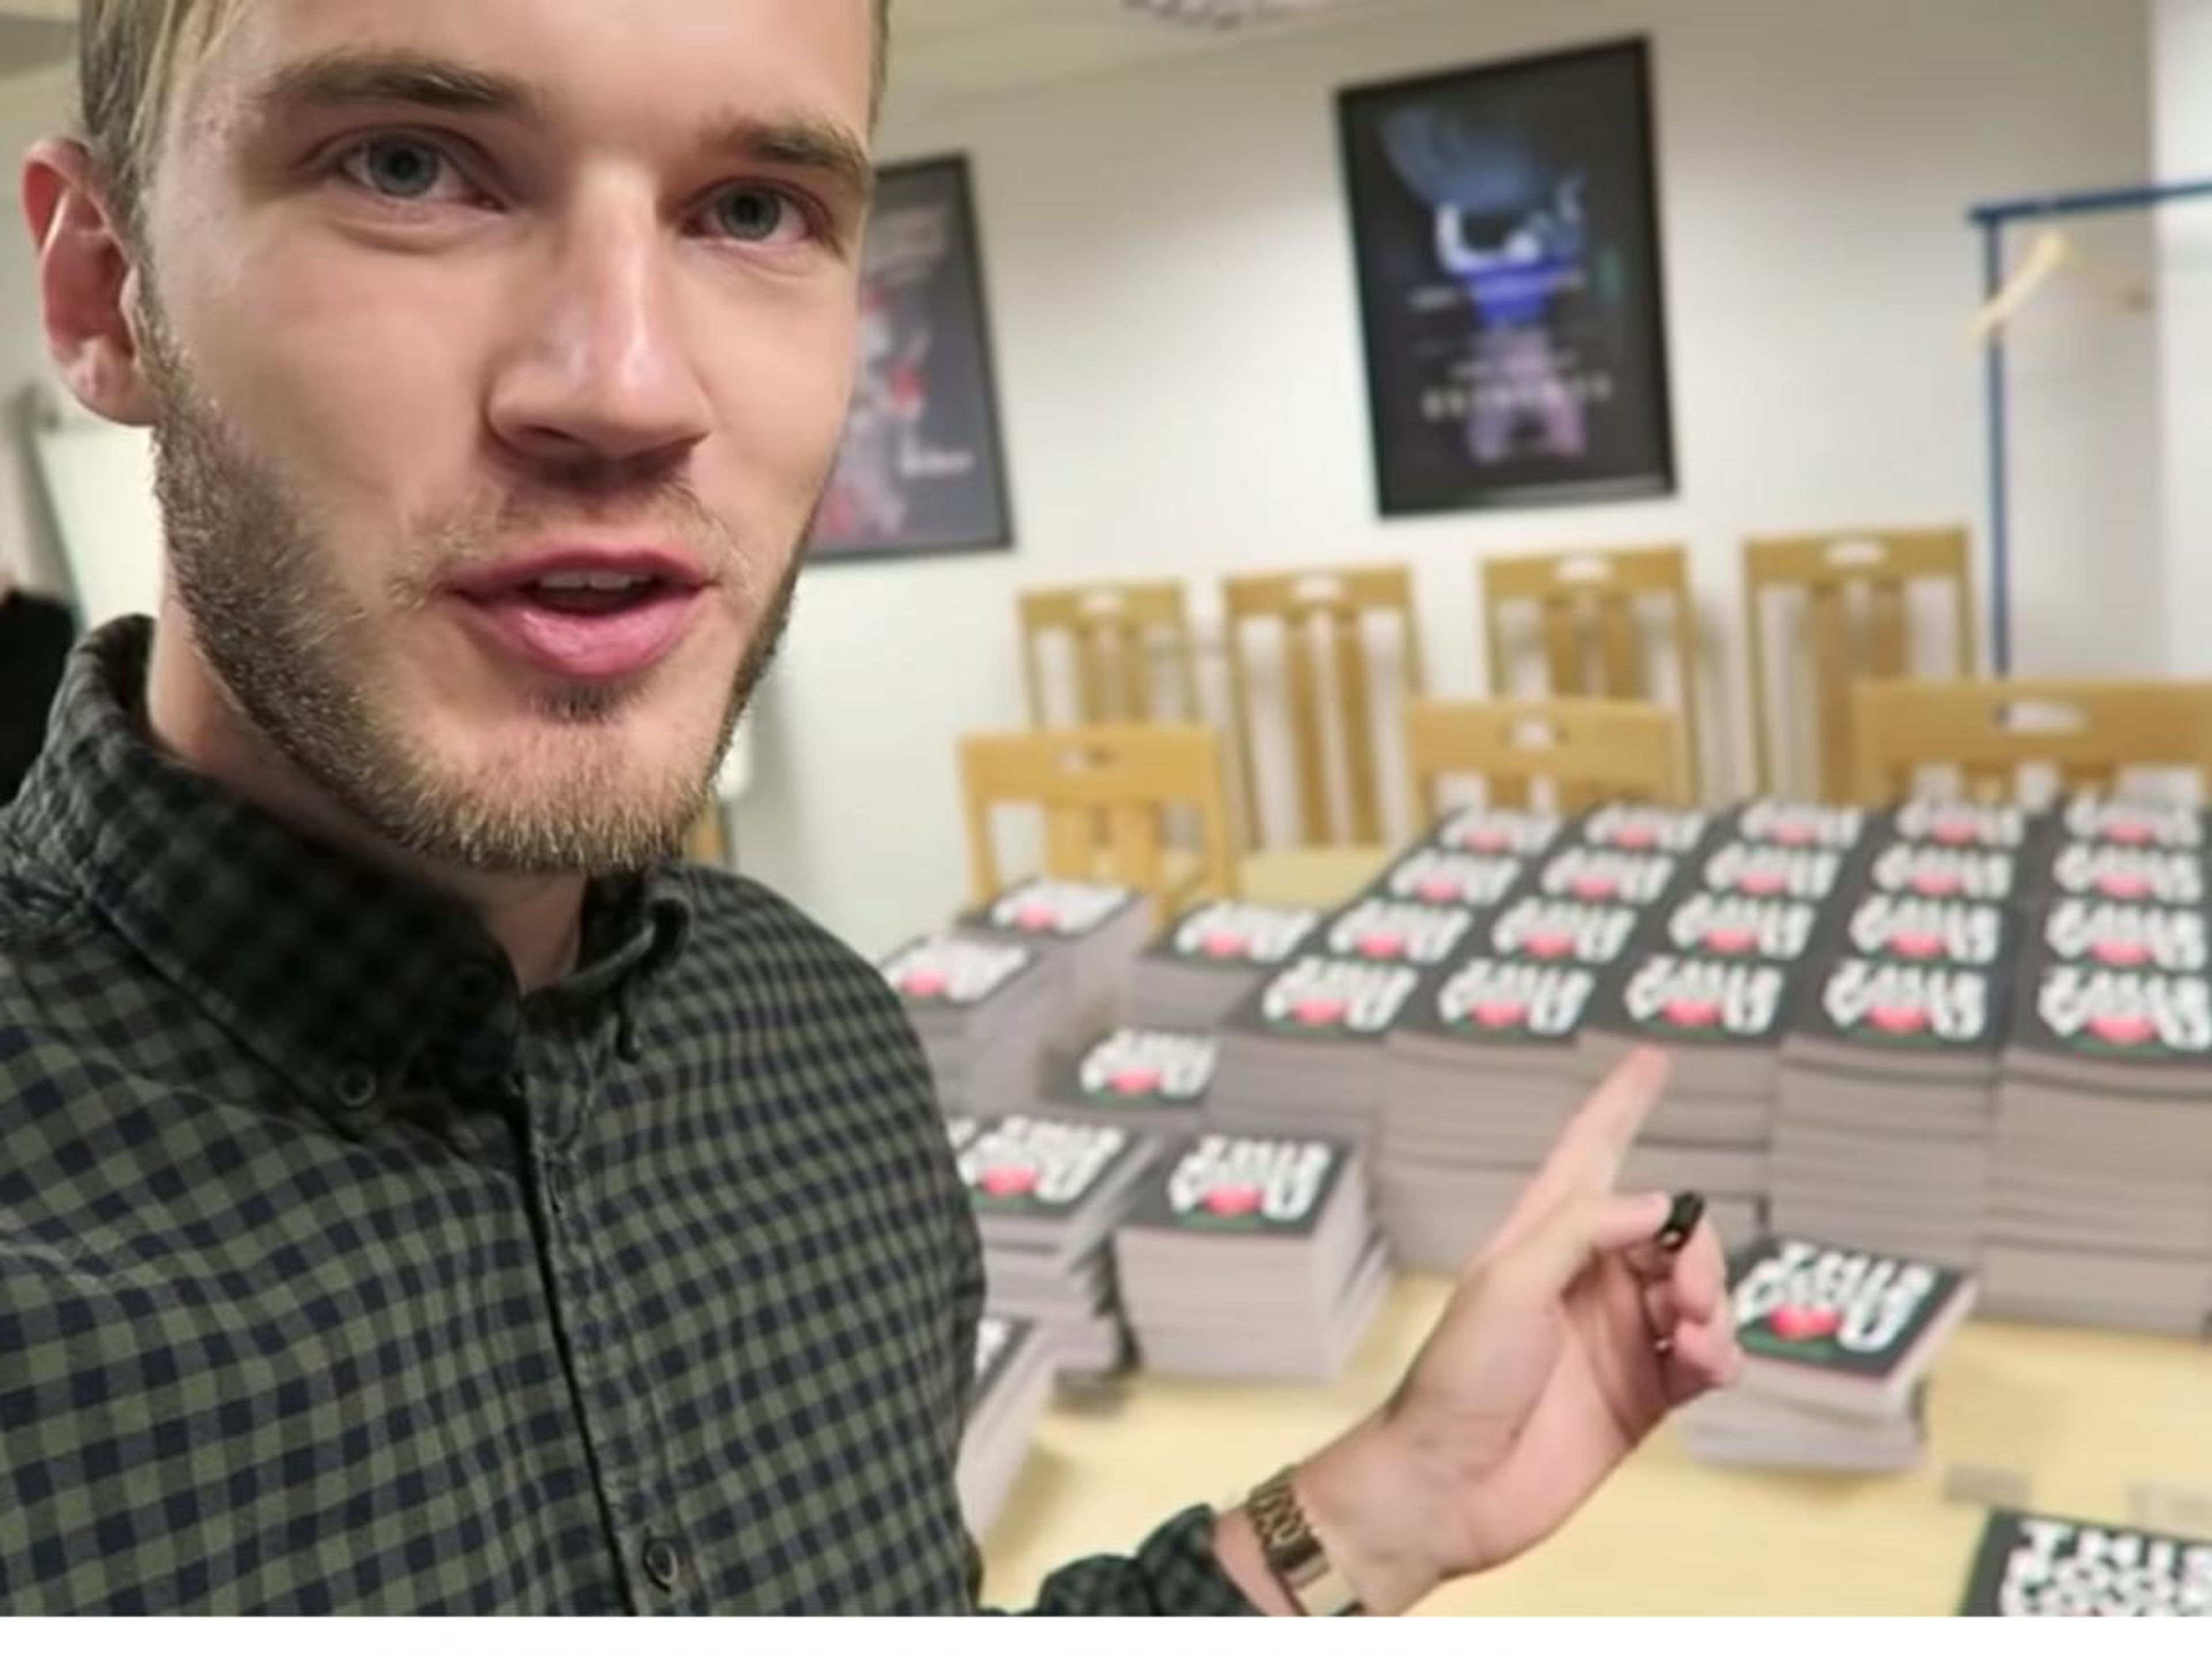 Also in 2015, Kjellberg released a satirical self-help book called "This Book Loves You." The book parodying motivational texts rose to No. 1 on The New York Times bestseller list when it was released that November.